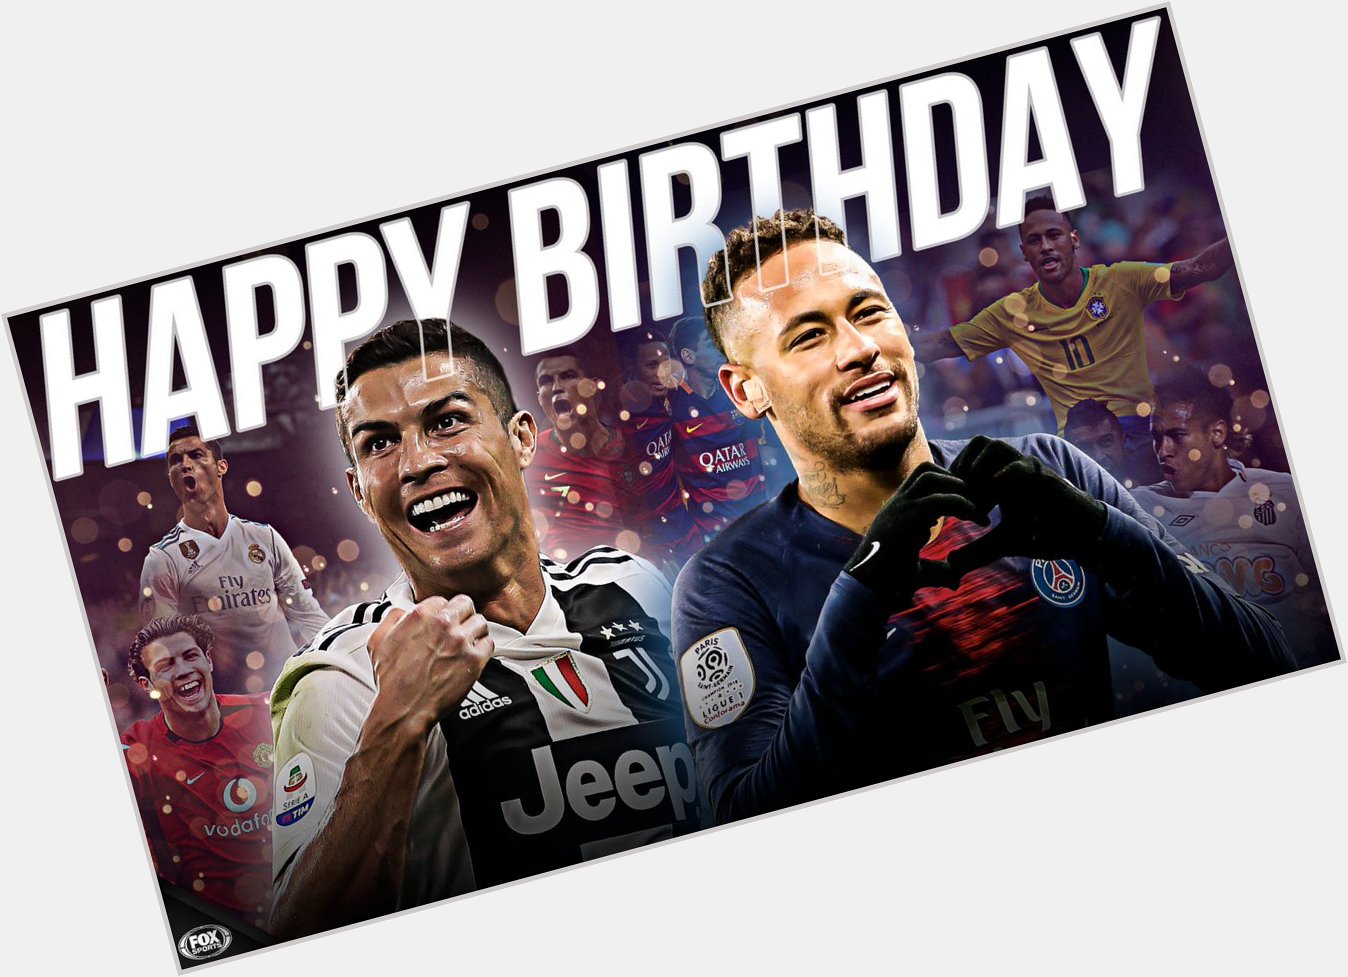 Two legends. One birthday.

Happy 34th to Cristiano Ronaldo, and happy 27th to Neymar! 